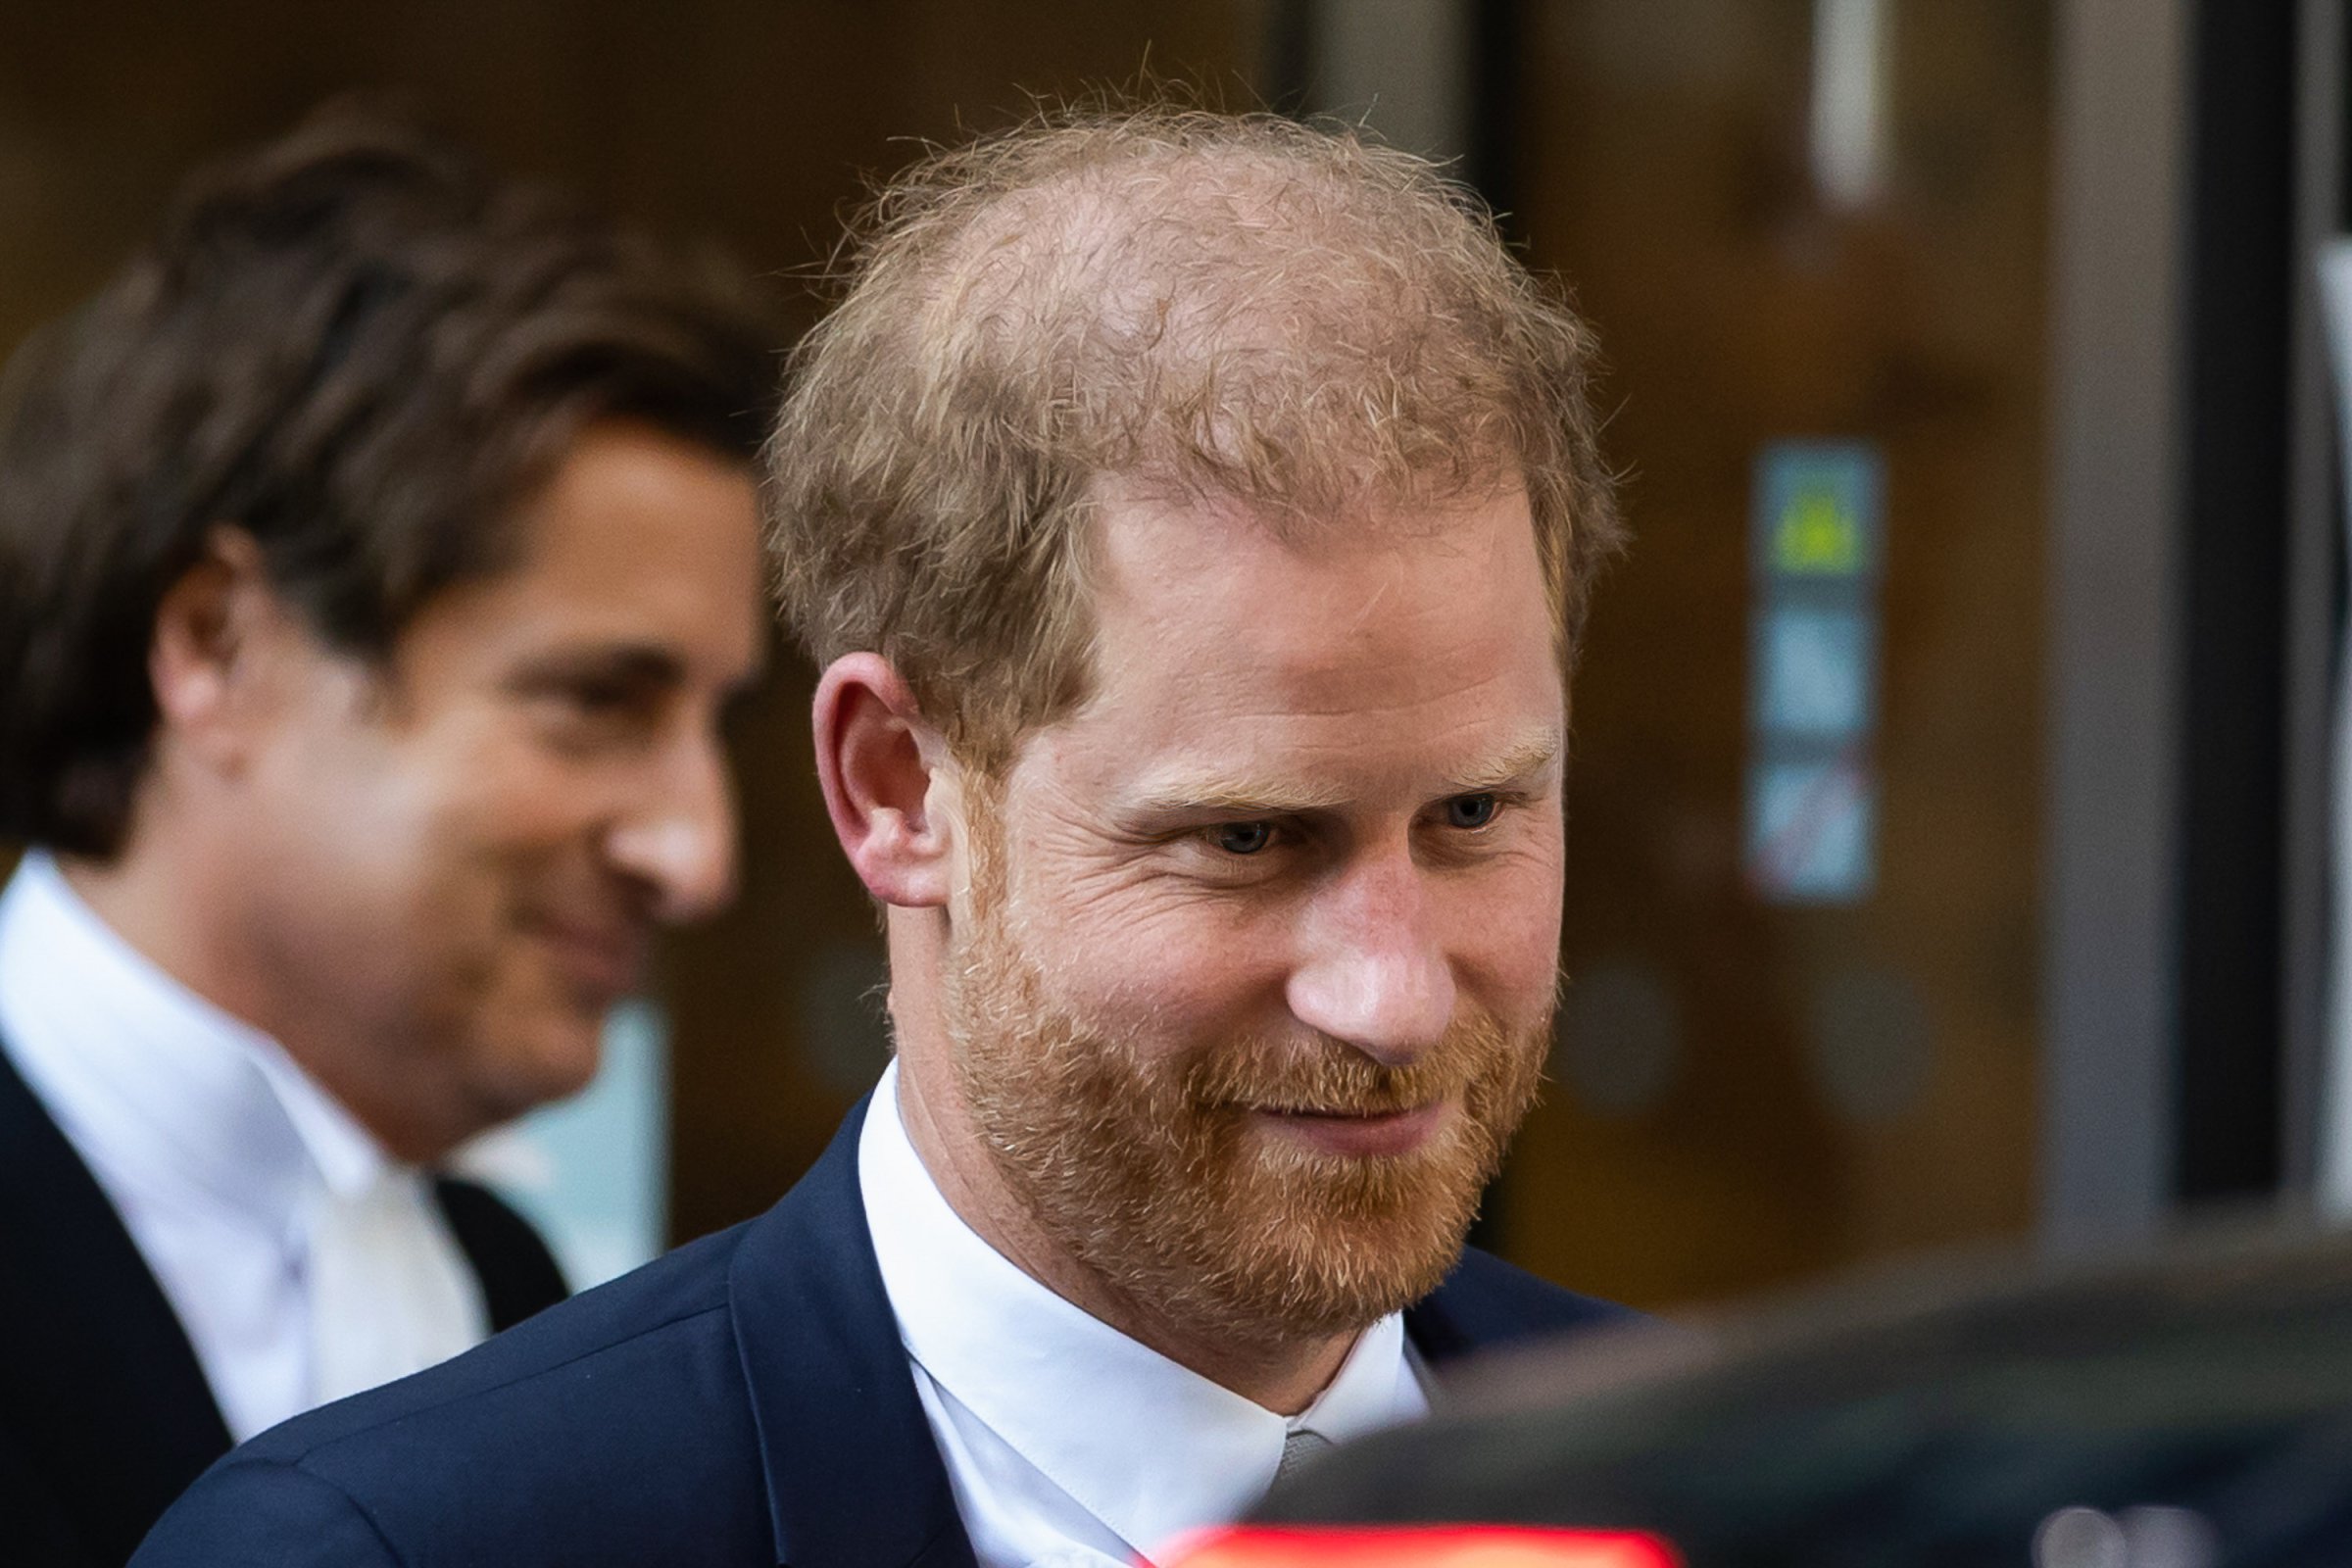 Prince Harry, Duke of Sussex leaves the Rolls Building at